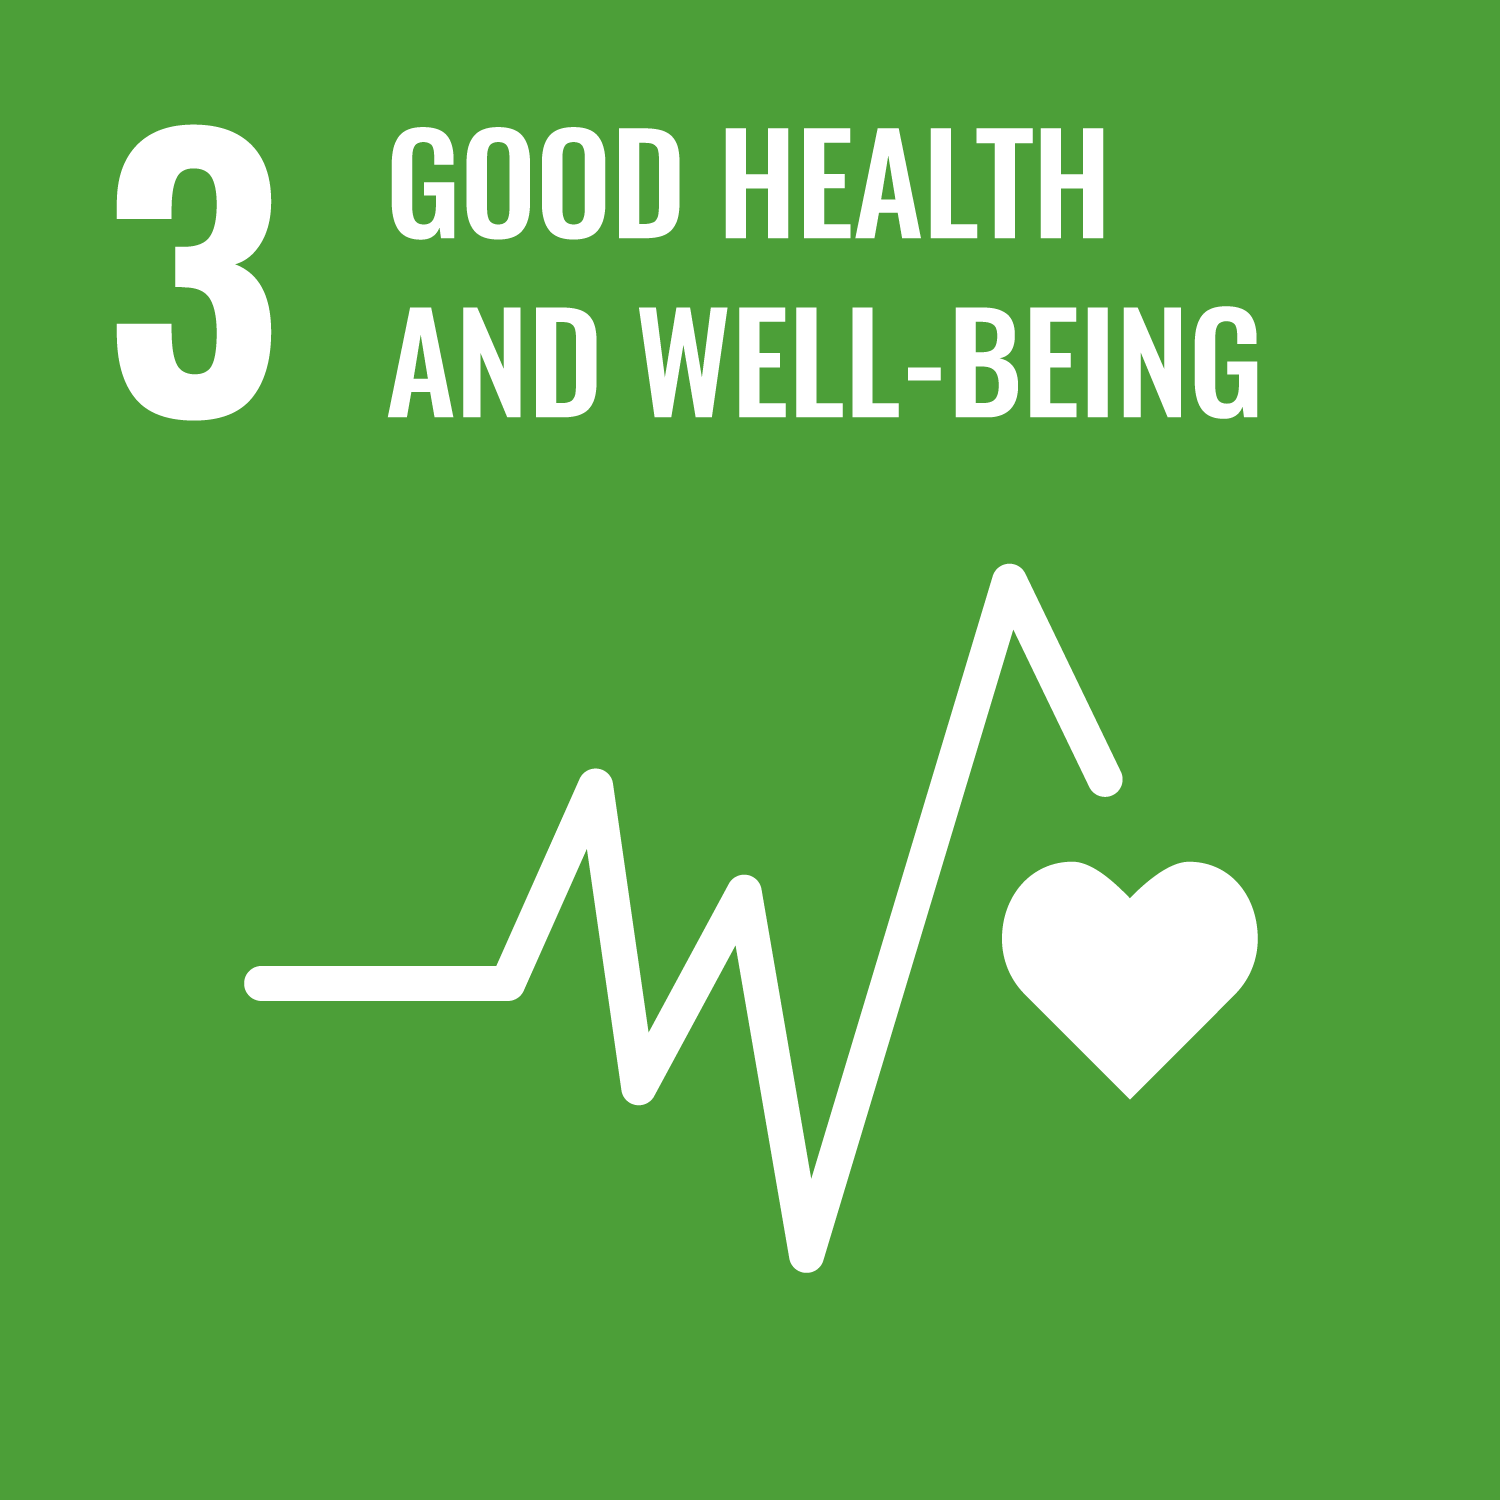 Goal 3 GOOD HEALTH AND WELL-BEING